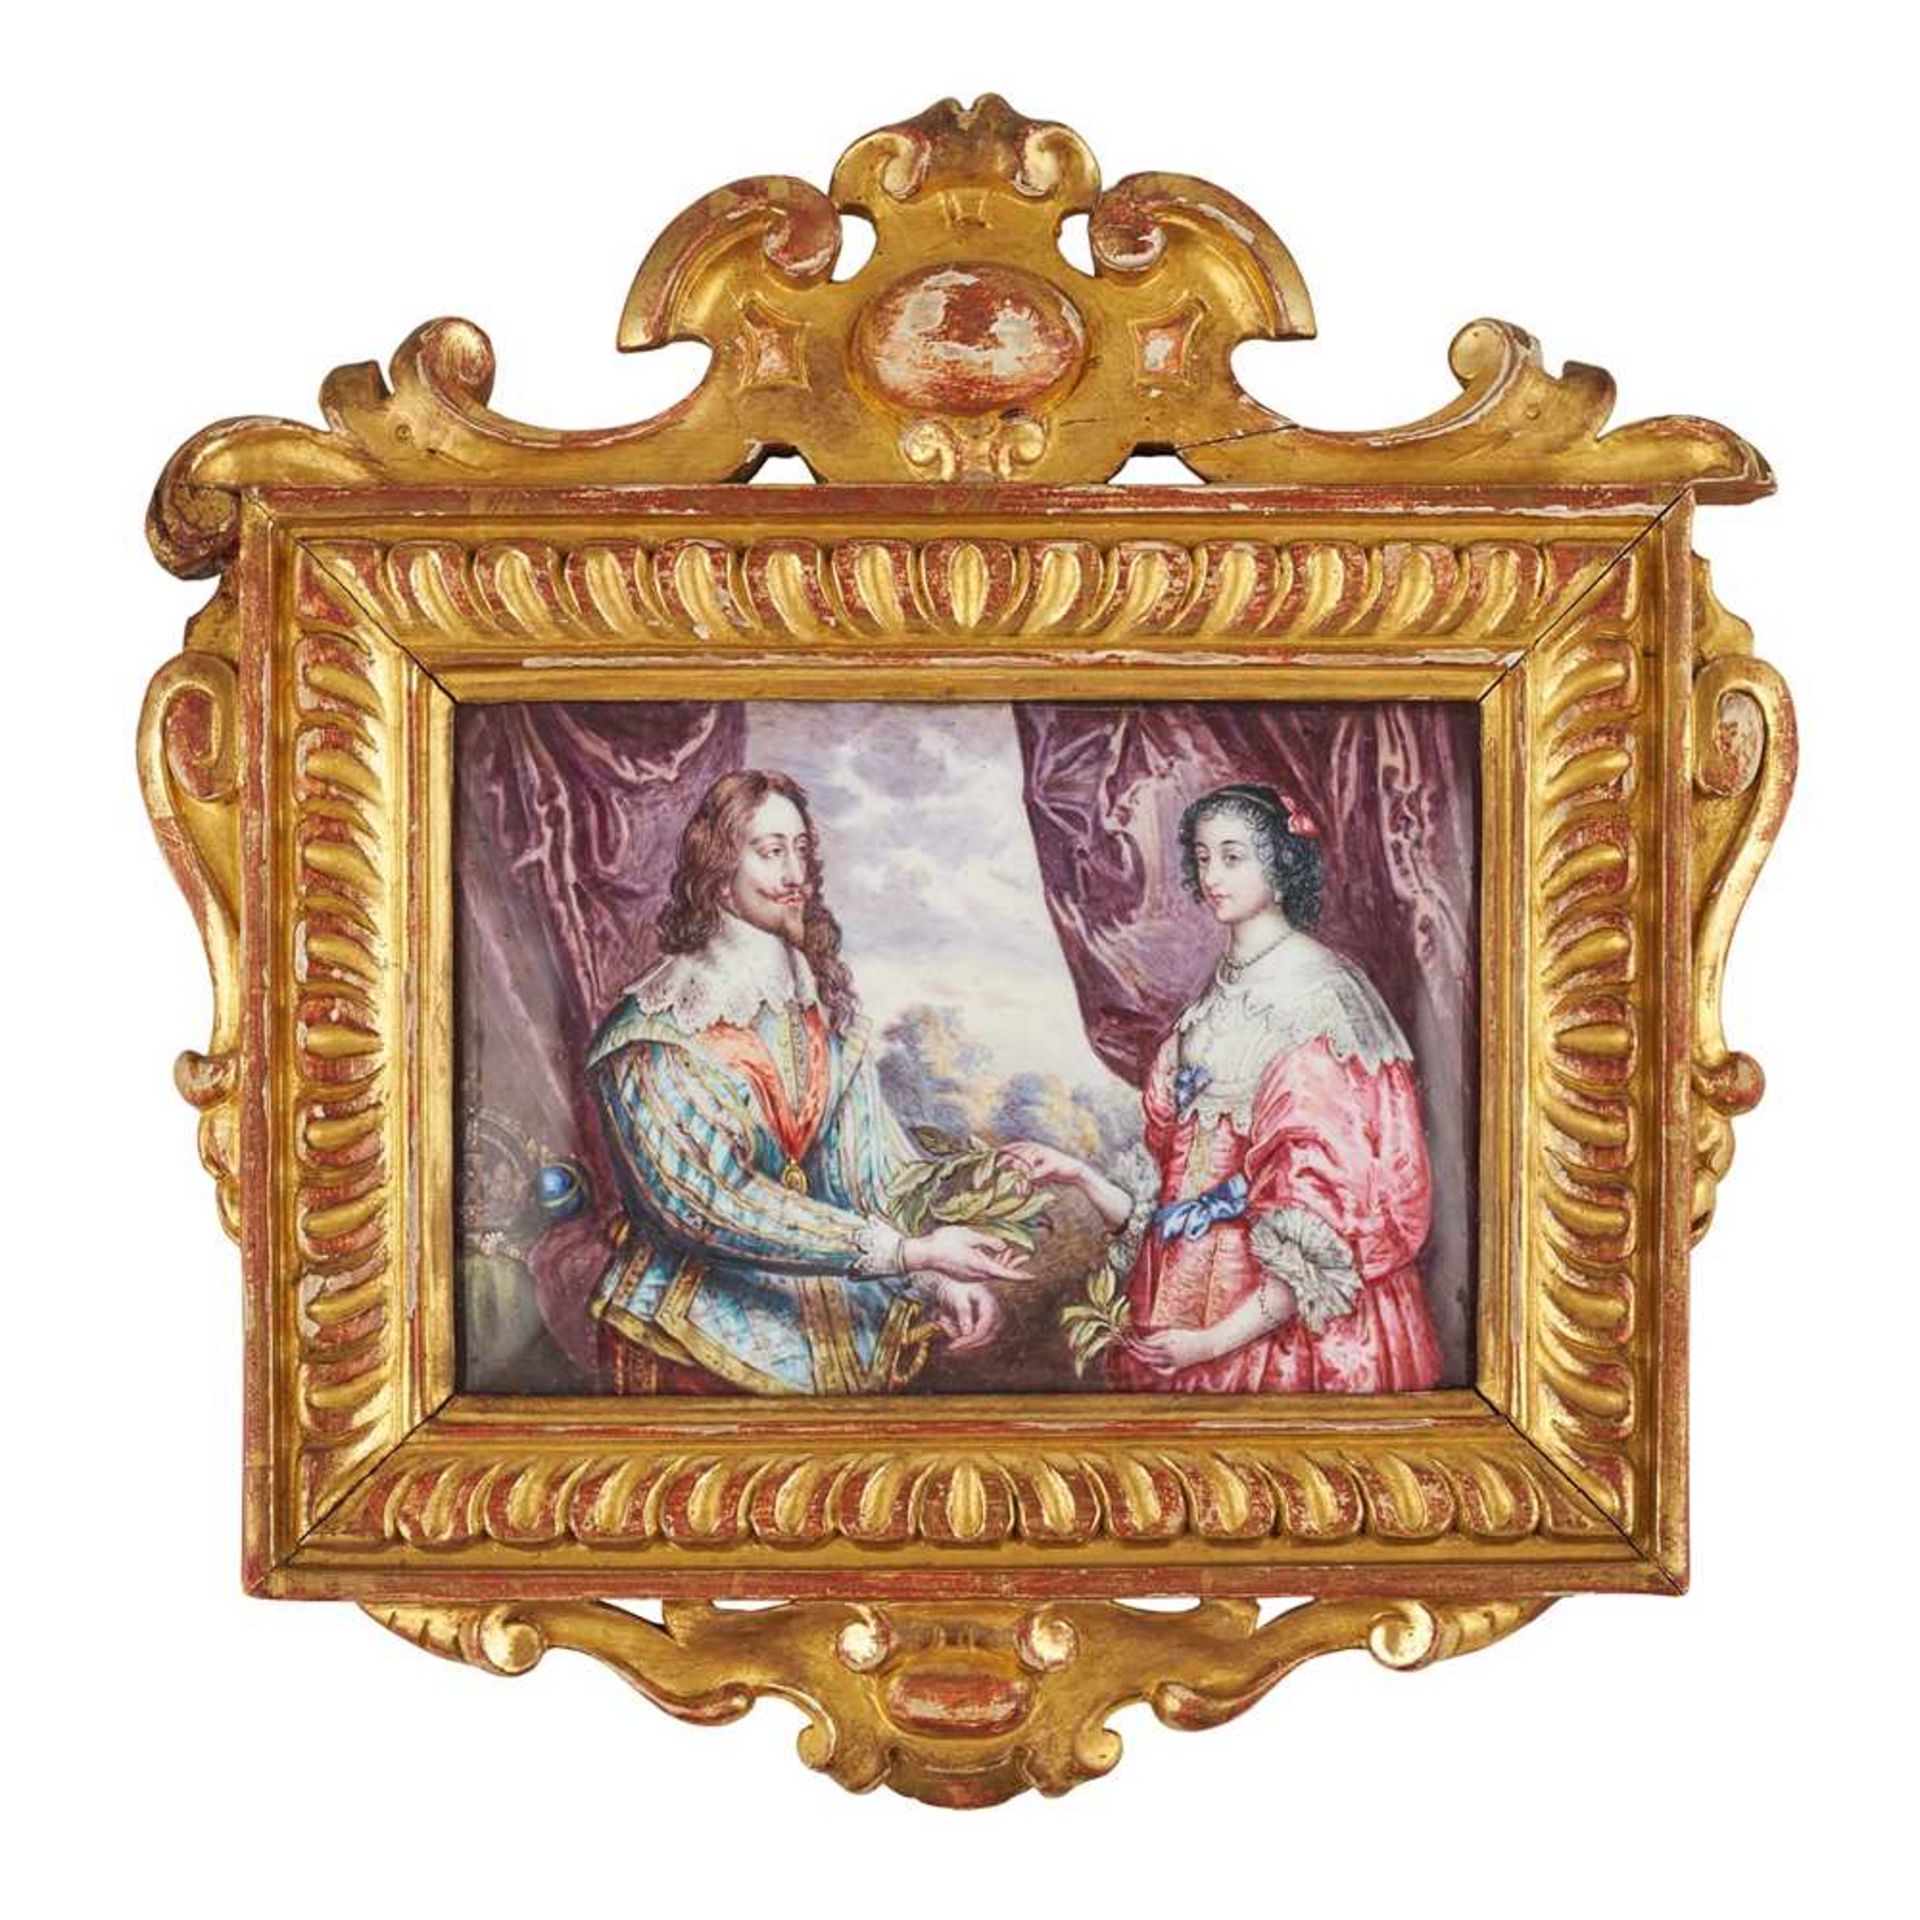 FRENCH ENAMEL ON COPPER PLAQUE, CHARLES I AND HENRIETTA MARIA HOLDING A LAUREL WREATH, AFTER ANTHONY